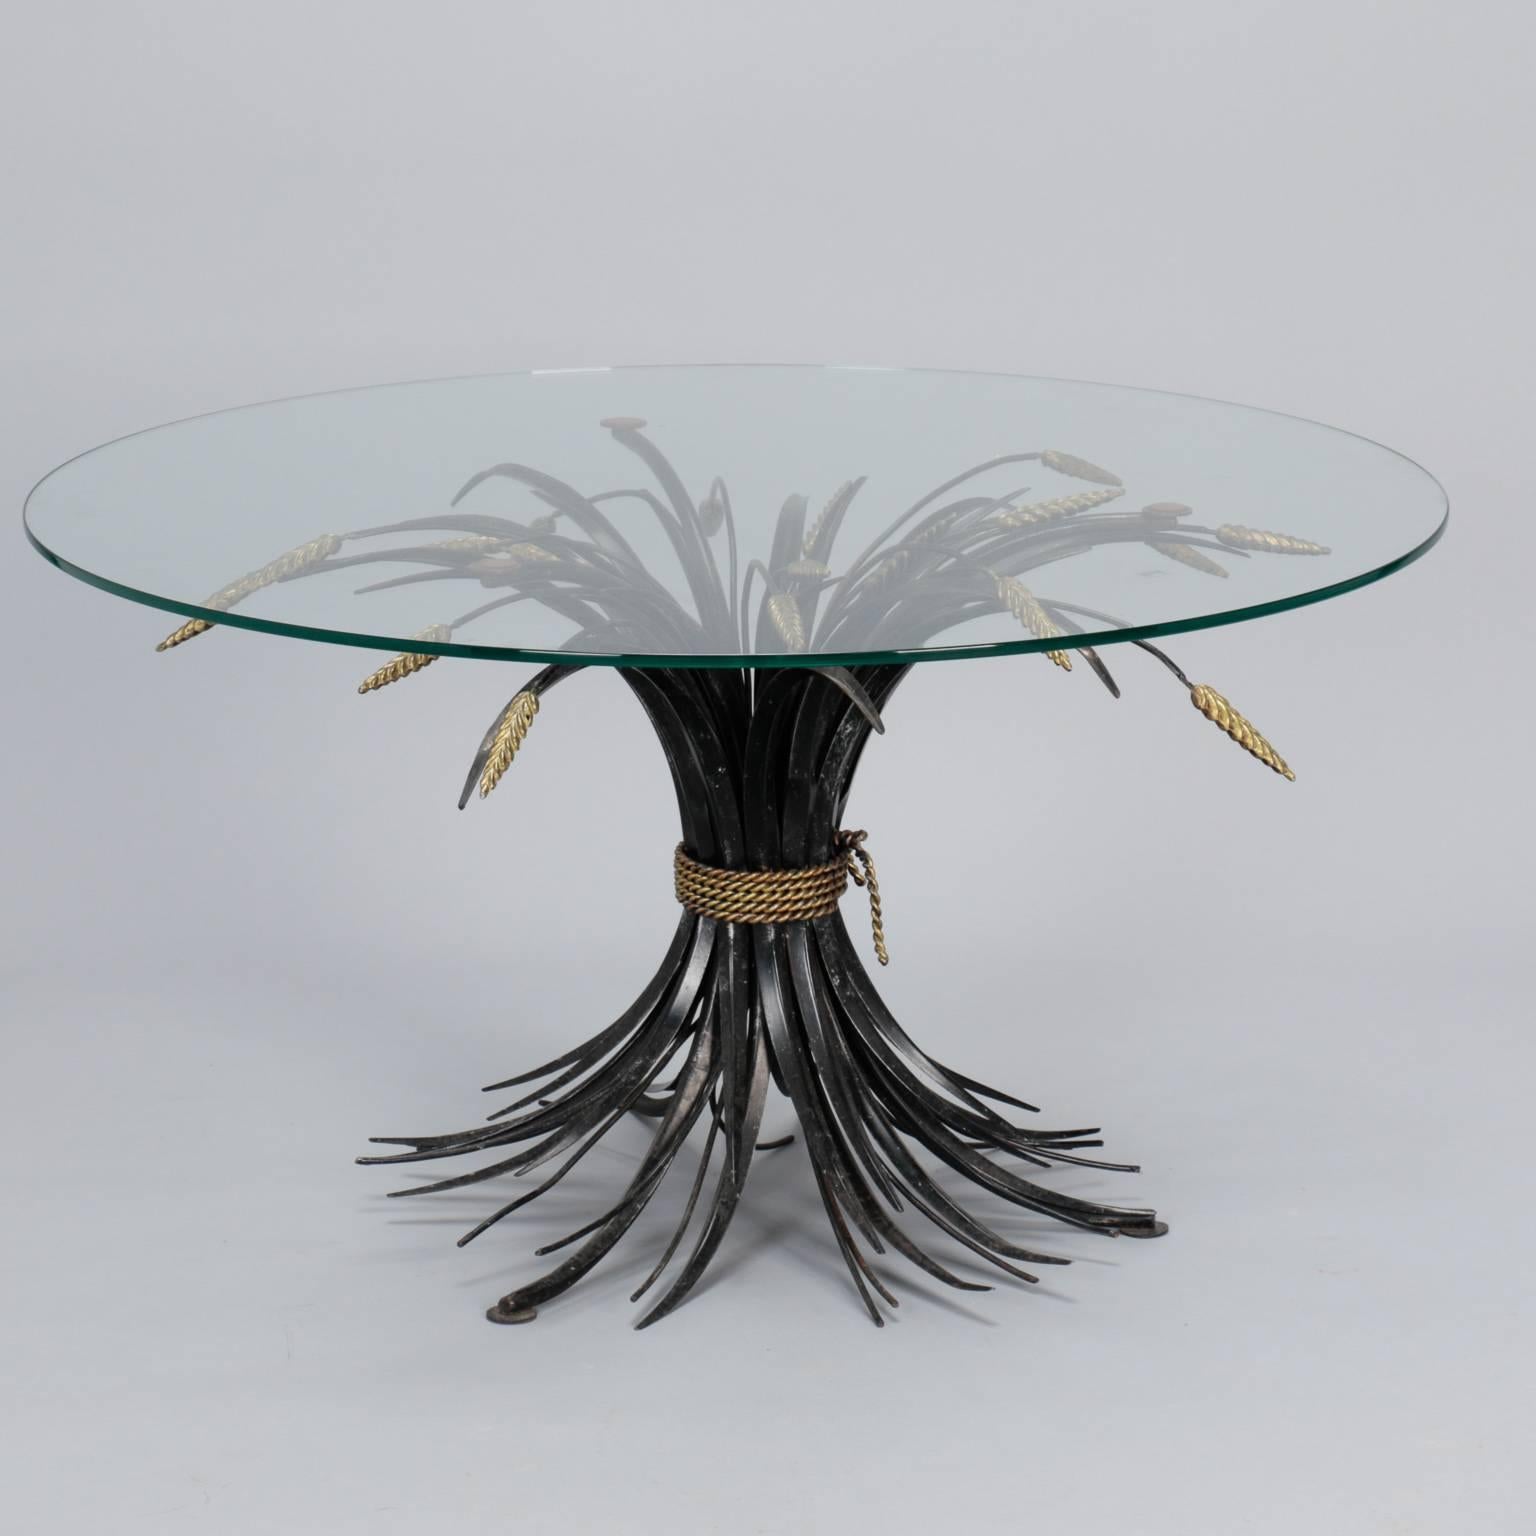 Found in Italy, this circa 1940s table has a metal base in the form of wheat sheaf gathered with braided rope. Unusual finish with black stems and contrasting gilded rope and wheat grains. Round glass top is 26” diameter, this base could support a